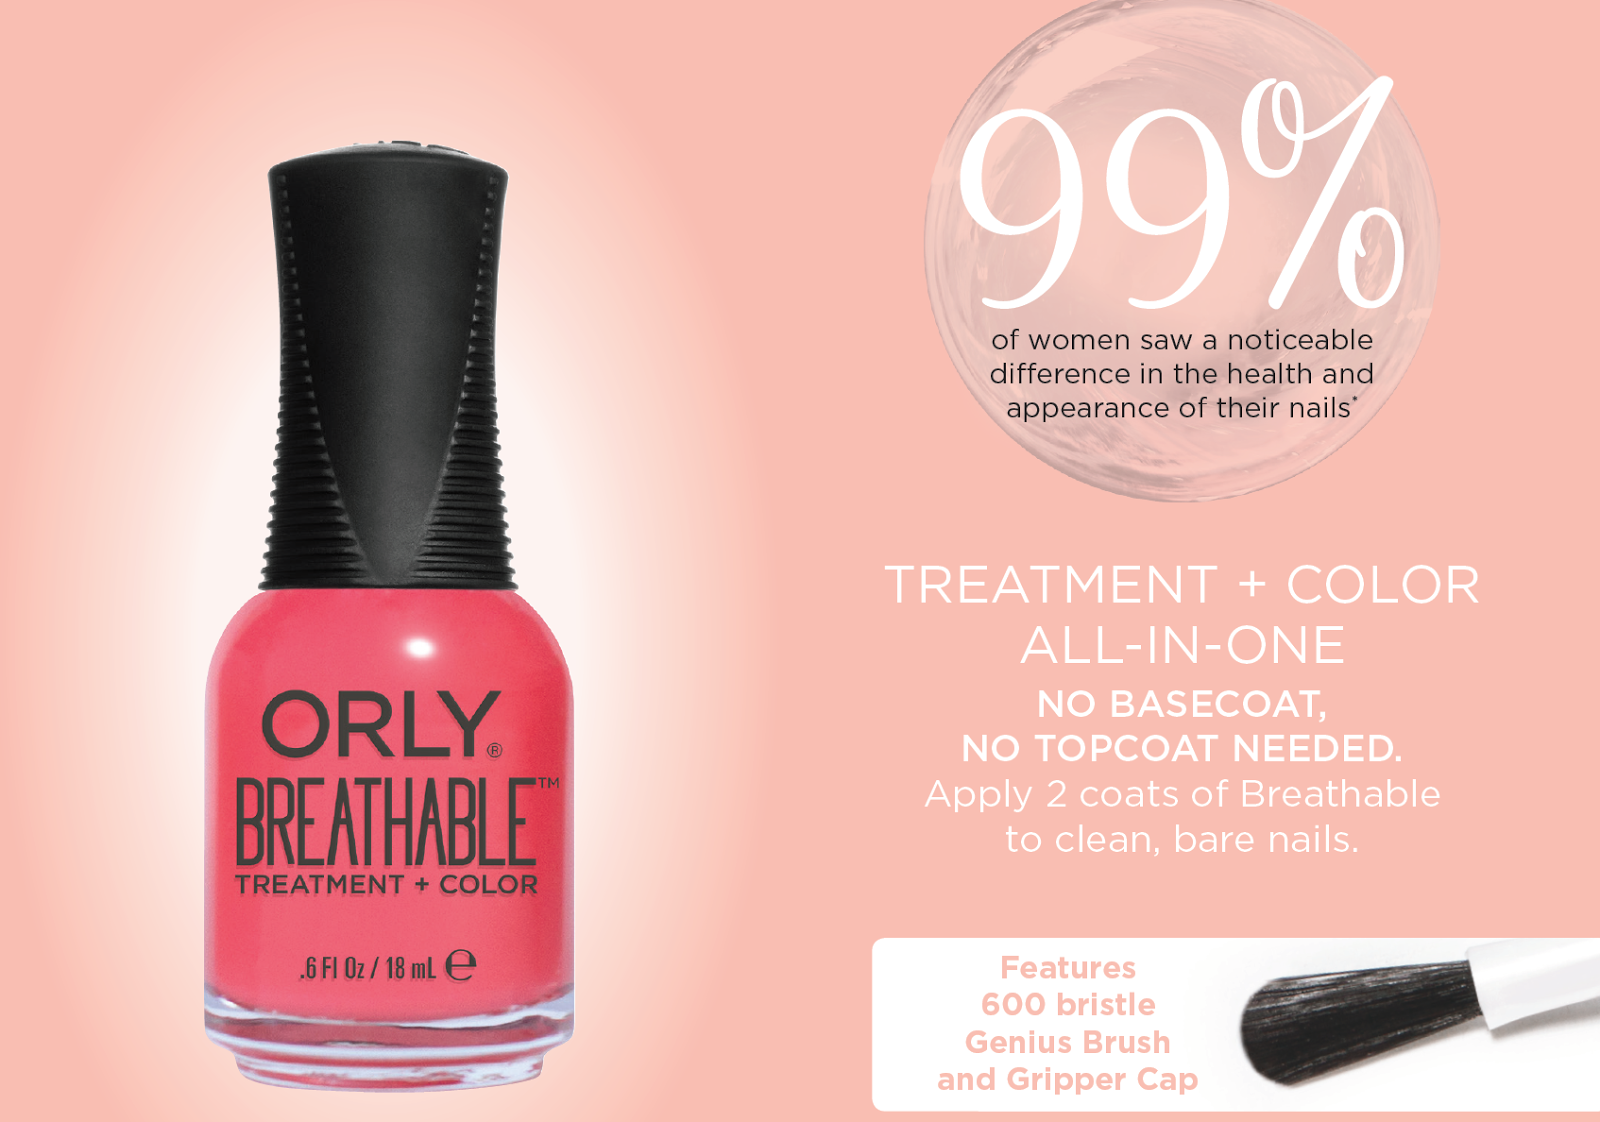 2. Orly Breathable Treatment + Color in "Nude" - wide 7